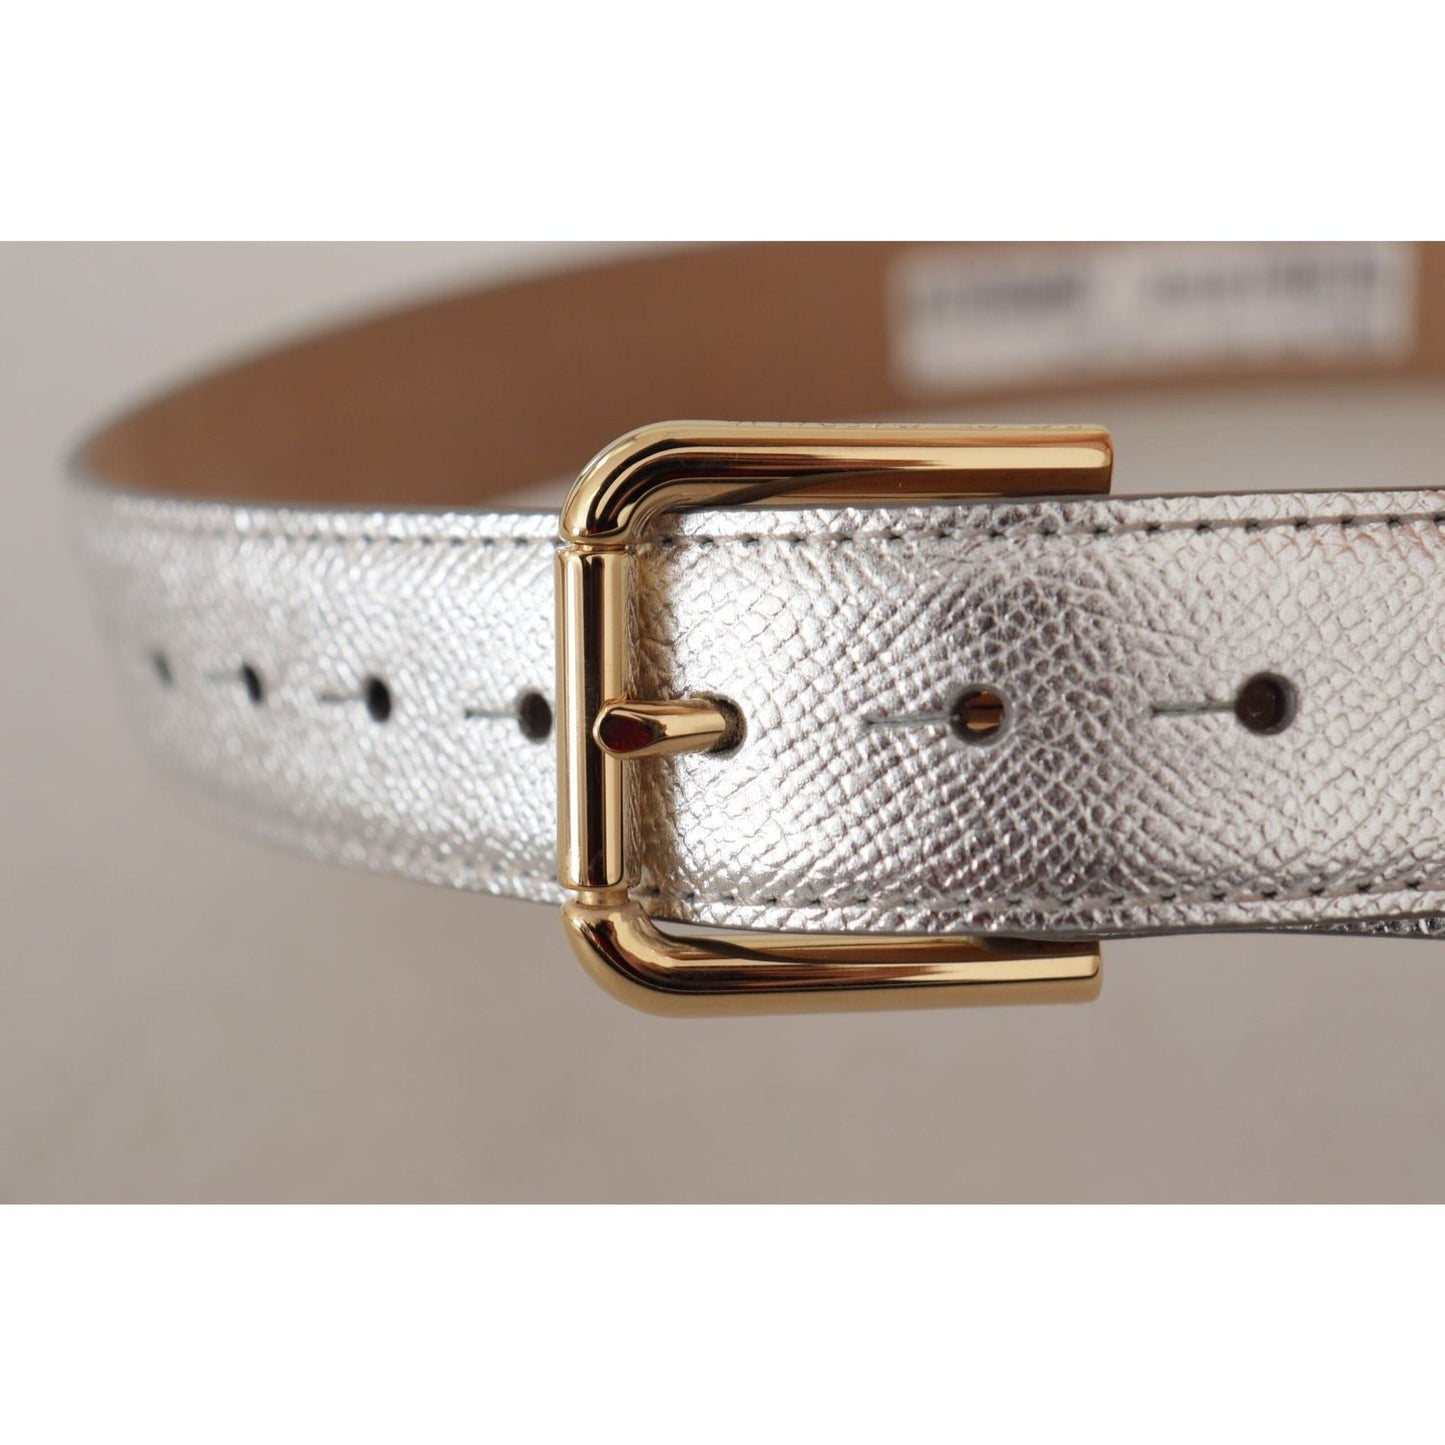 Dolce & Gabbana Elegant Silver Leather Belt with Engraved Buckle silver-leather-gold-tone-logo-metal-waist-buckle-belt IMG_8747-scaled-2270f445-5ed.jpg